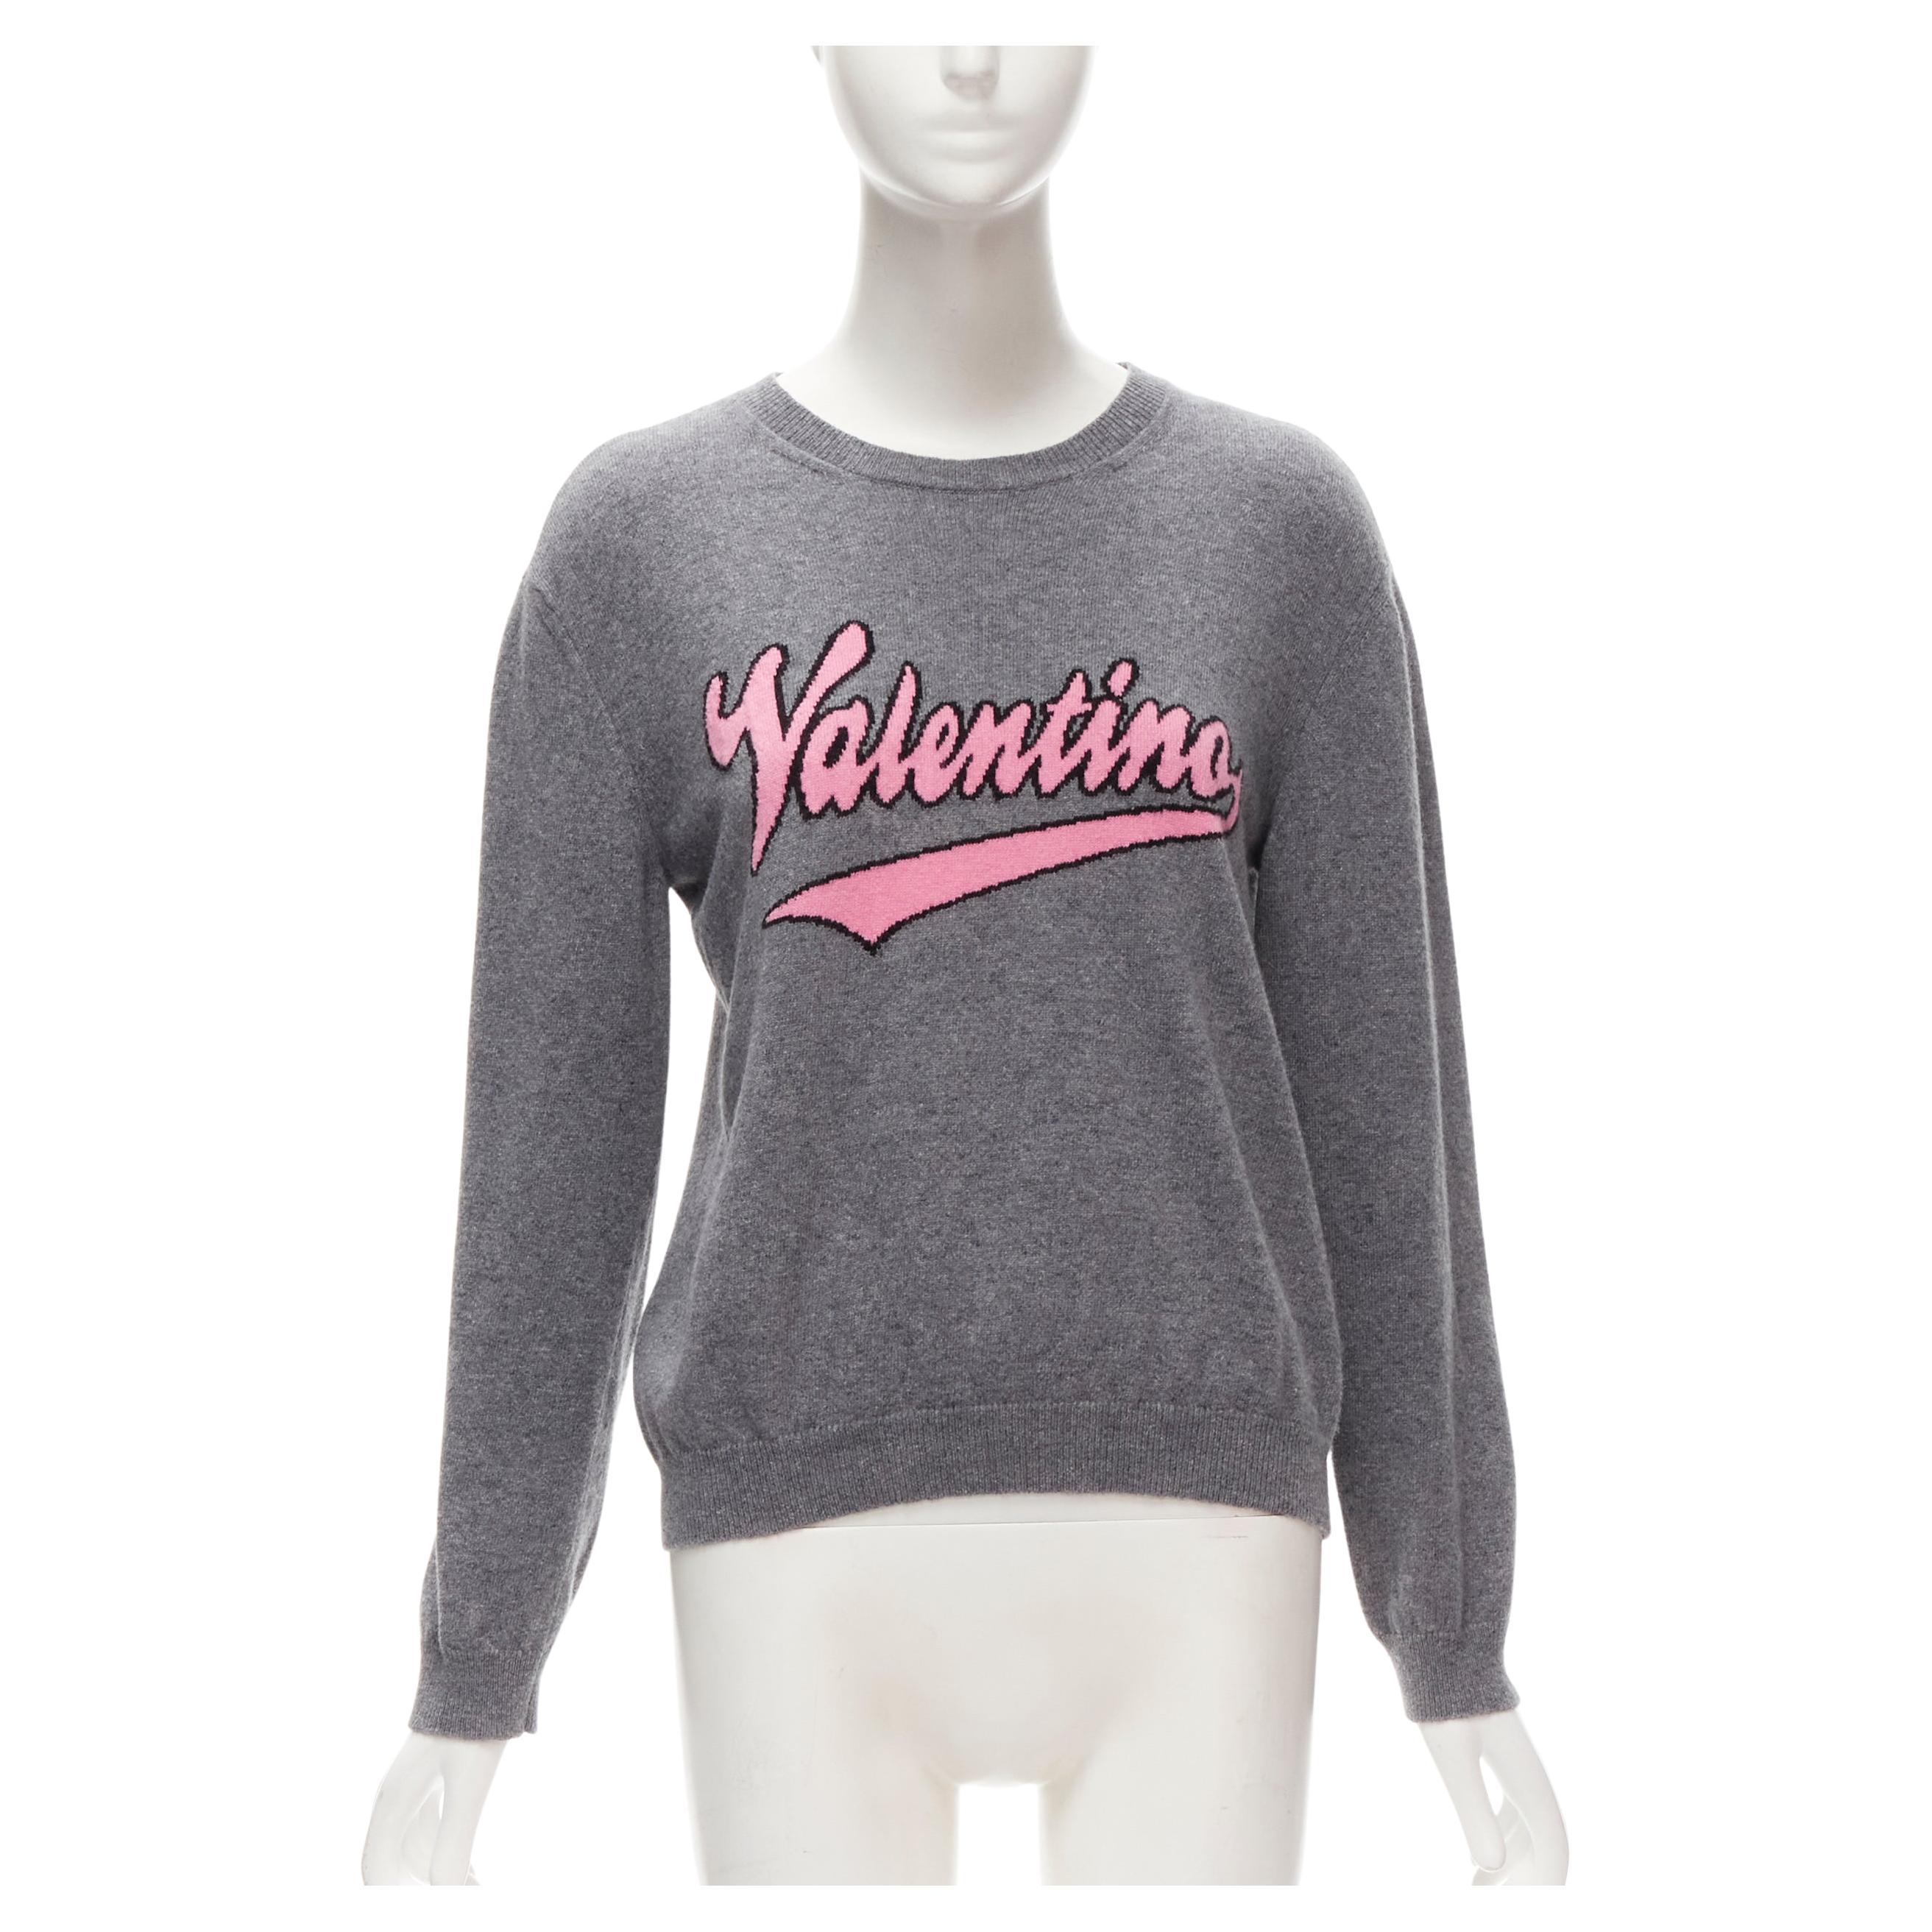 VALENTINO grey virgin wool cashmere pink cursive graphic logo sweater top M For Sale